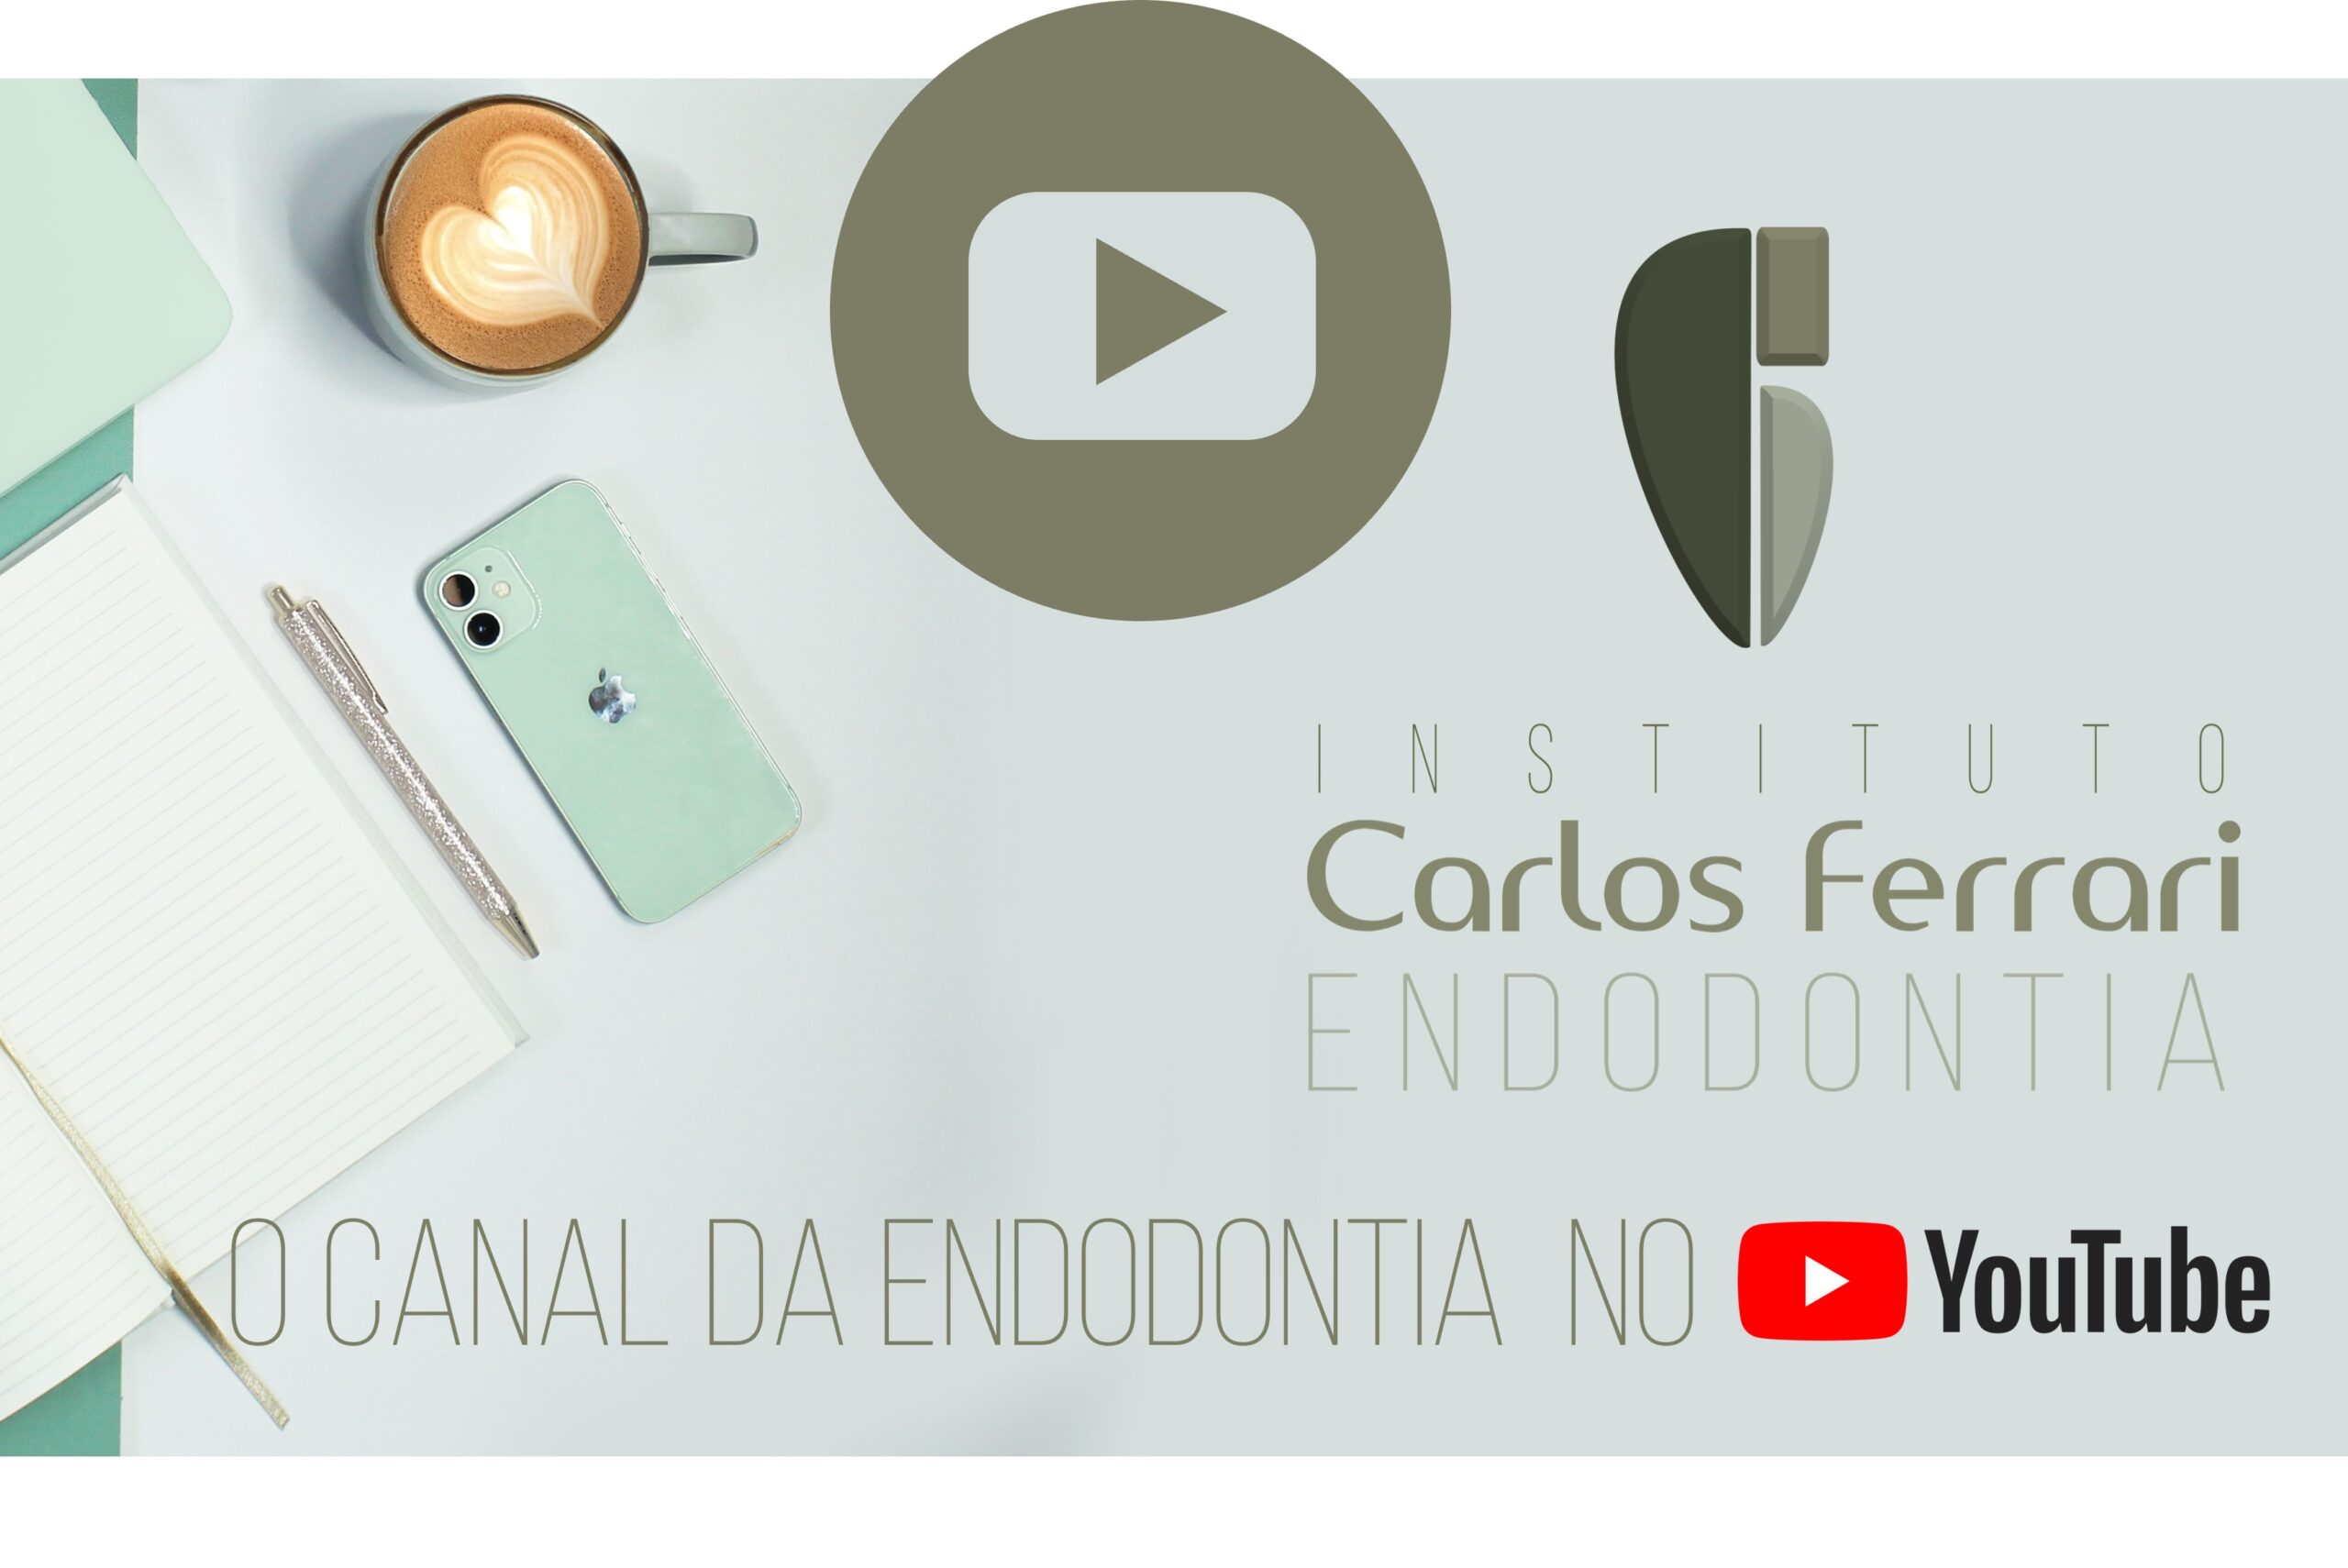 You are currently viewing Endodontia no youtube. Canal Carlos Ferrari.